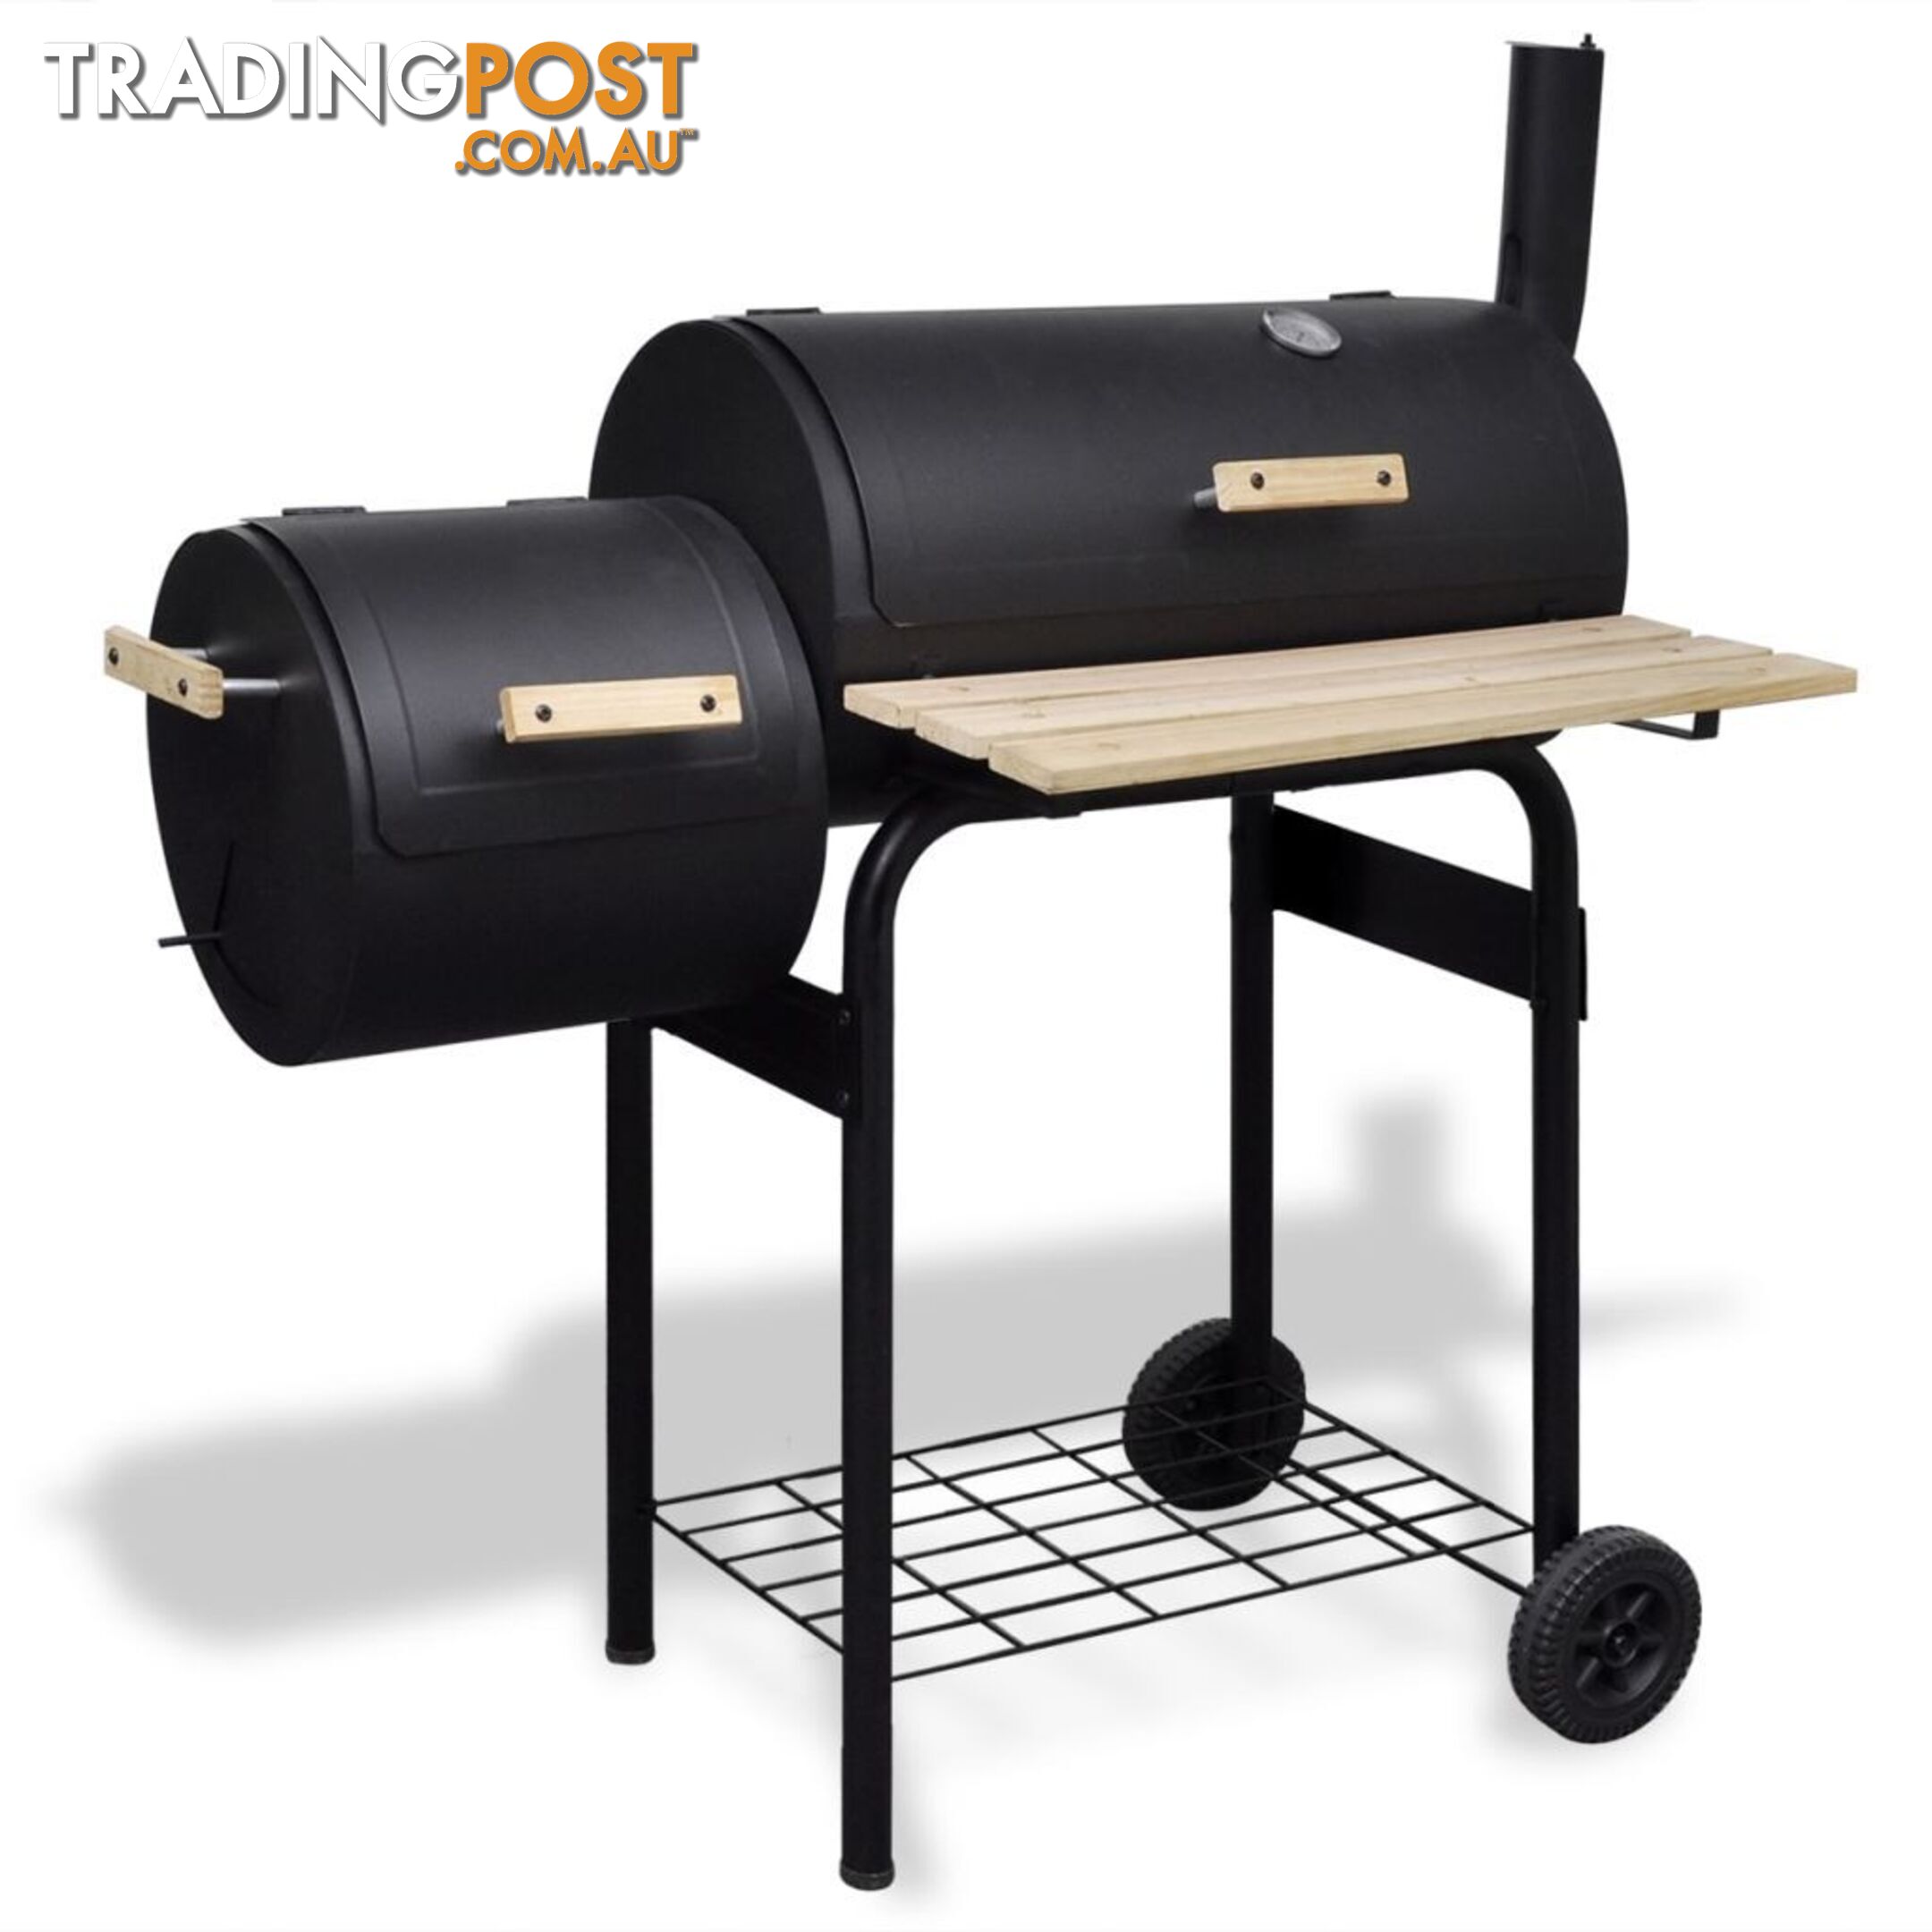 Classic Charcoal BBQ Offset Smoker - Unbranded - 4326500415028